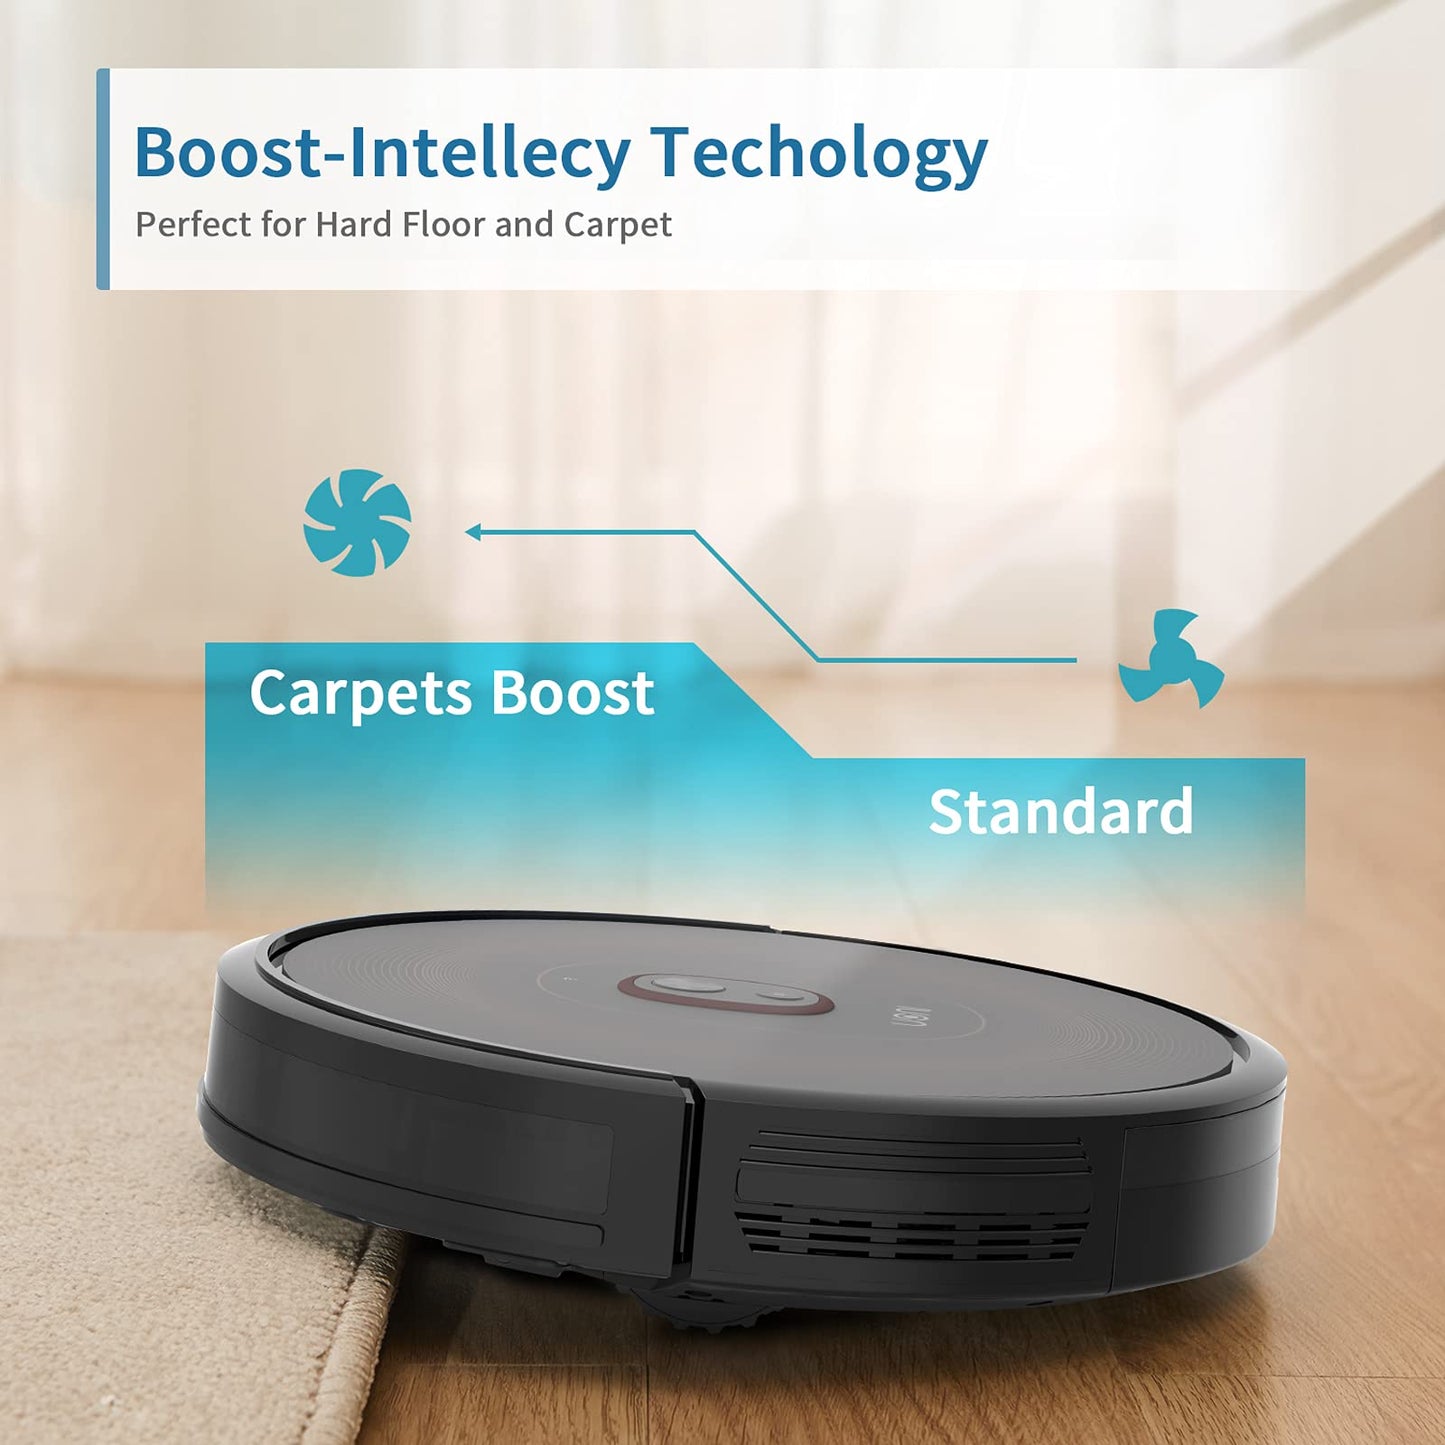 Uoni S1 Robot Vacuum Cleaner, Works with Alexa, Quiet, Super-Thin, 2000Pa Strong Suction, Wi-Fi Connected, Self Charging Robotic Vacuum Cleaner, Ideal for Pet Hair, Hard Floors and Carpets(Black)